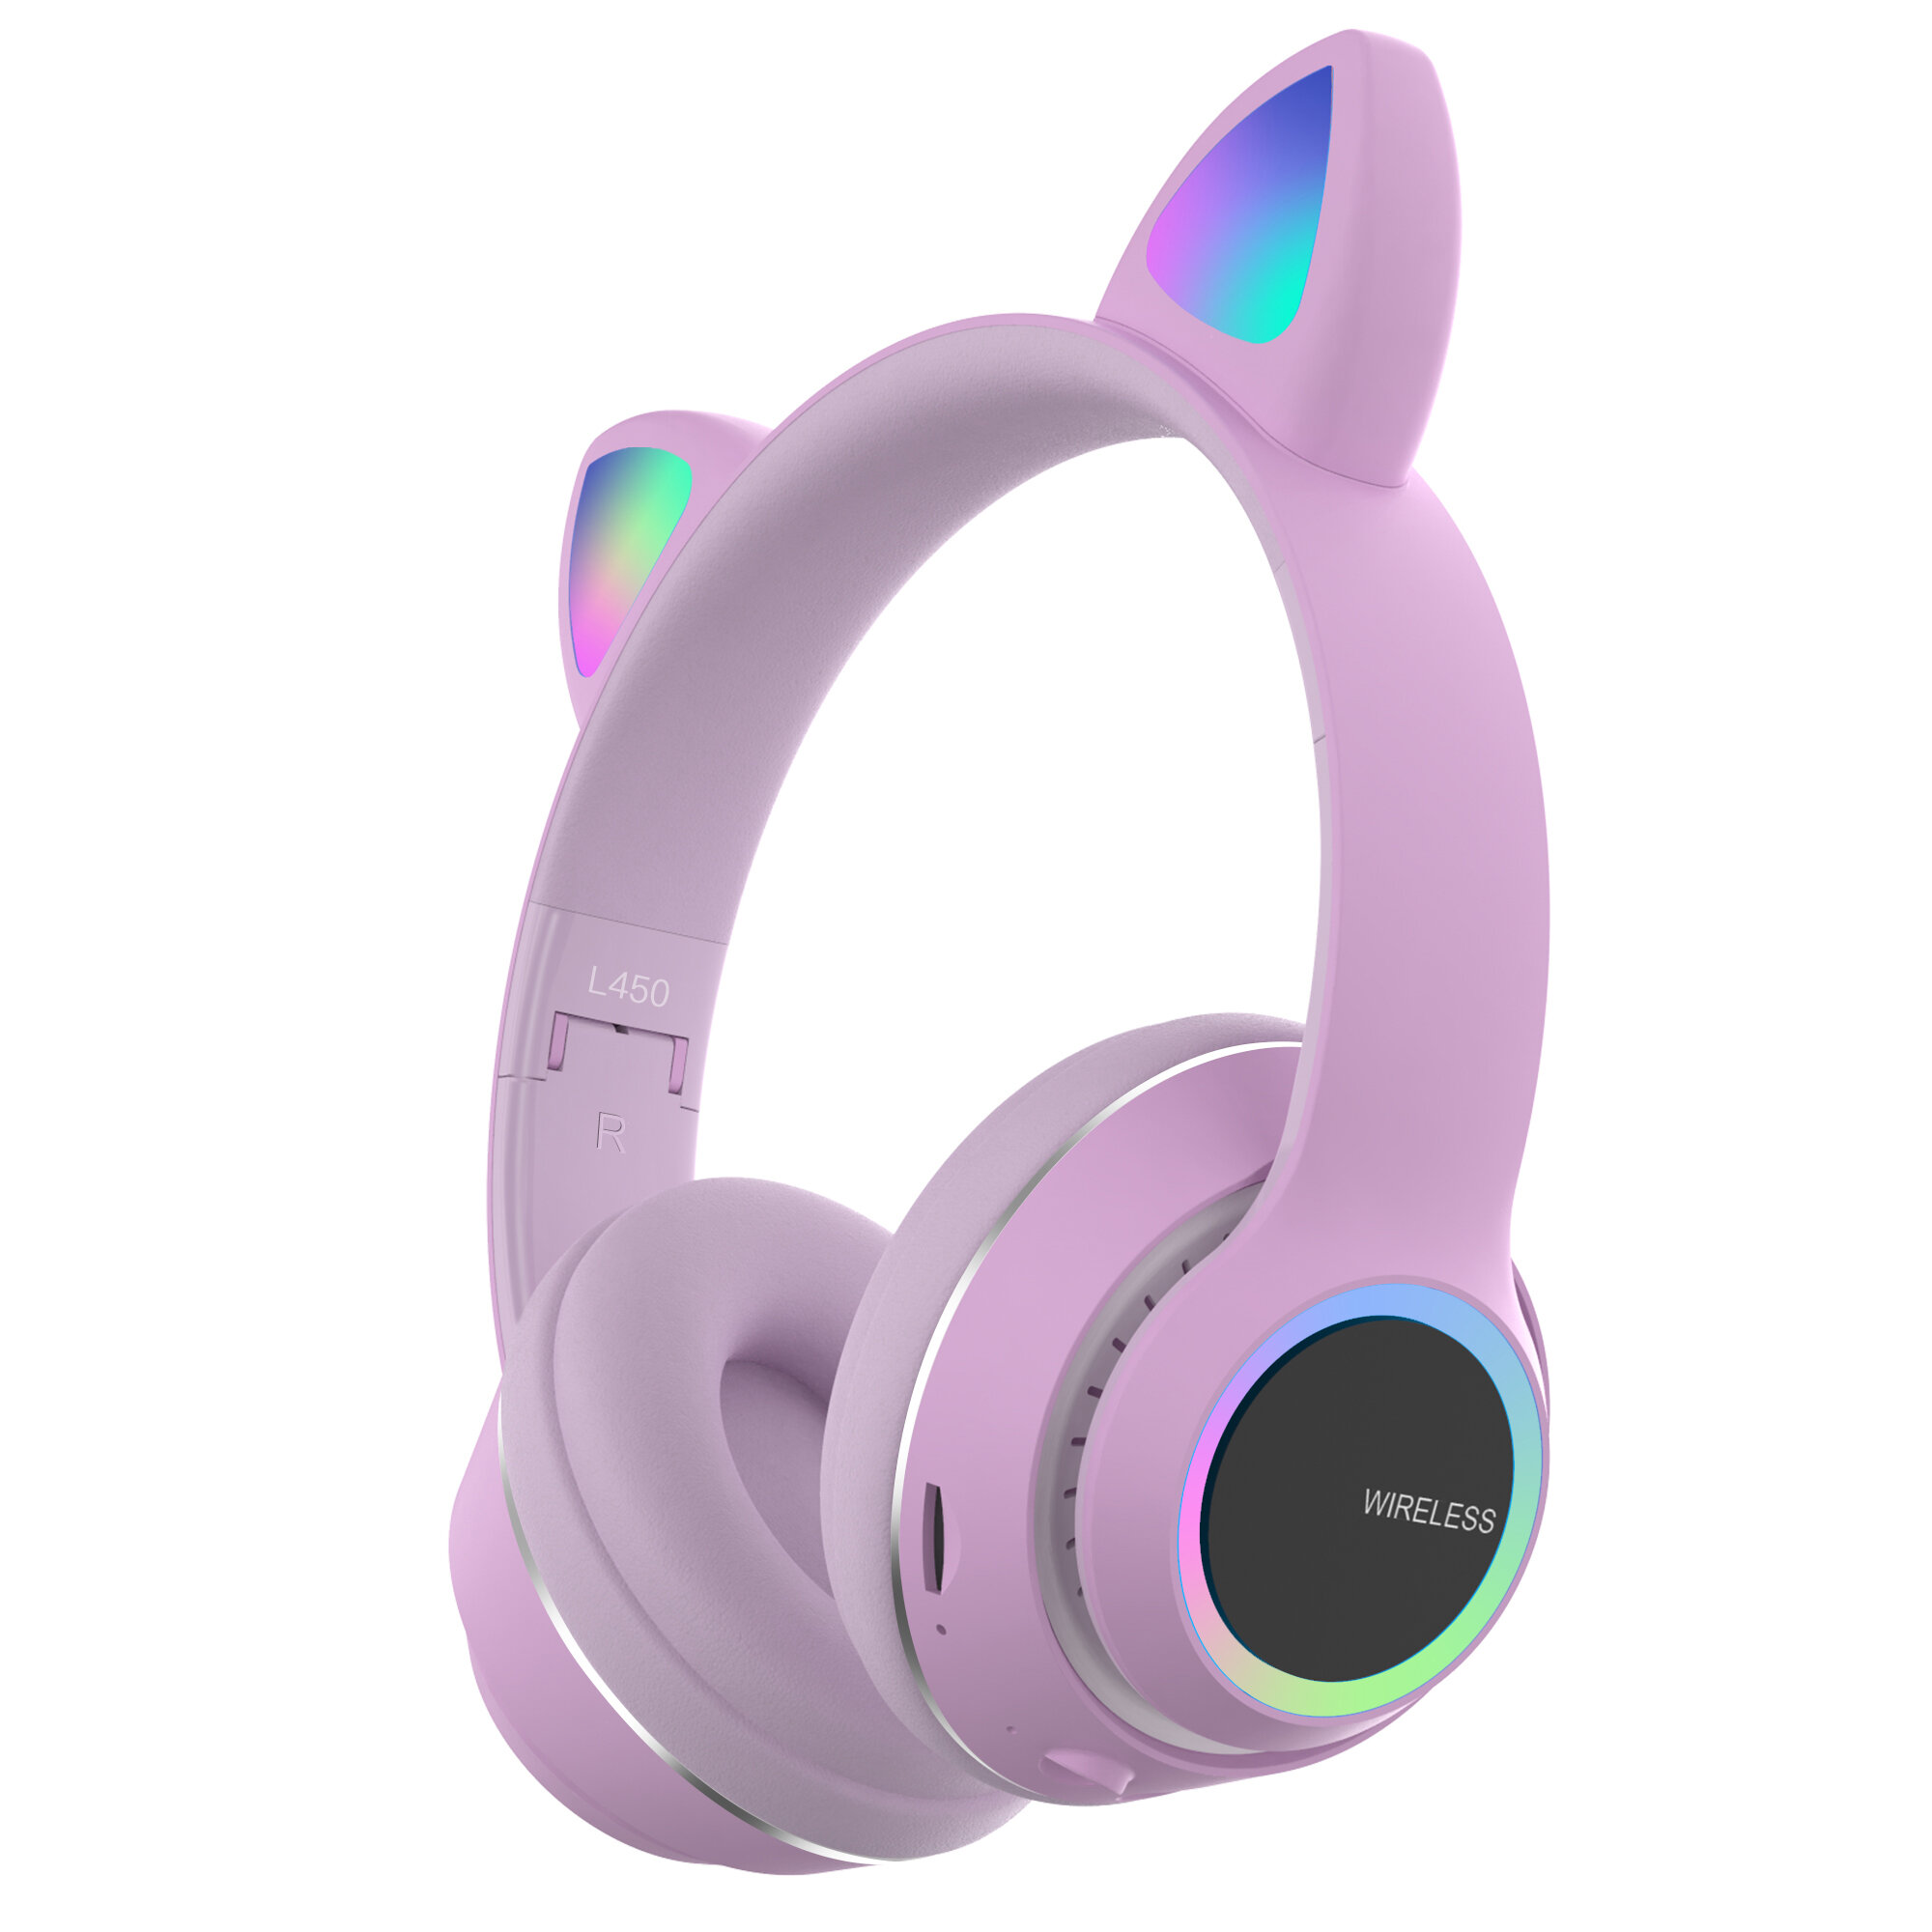 Bakeey L450 Cute Cat Ear bluetoothHeadset Foldable HiFi Music Headphone Supports TF Card FM with Mic